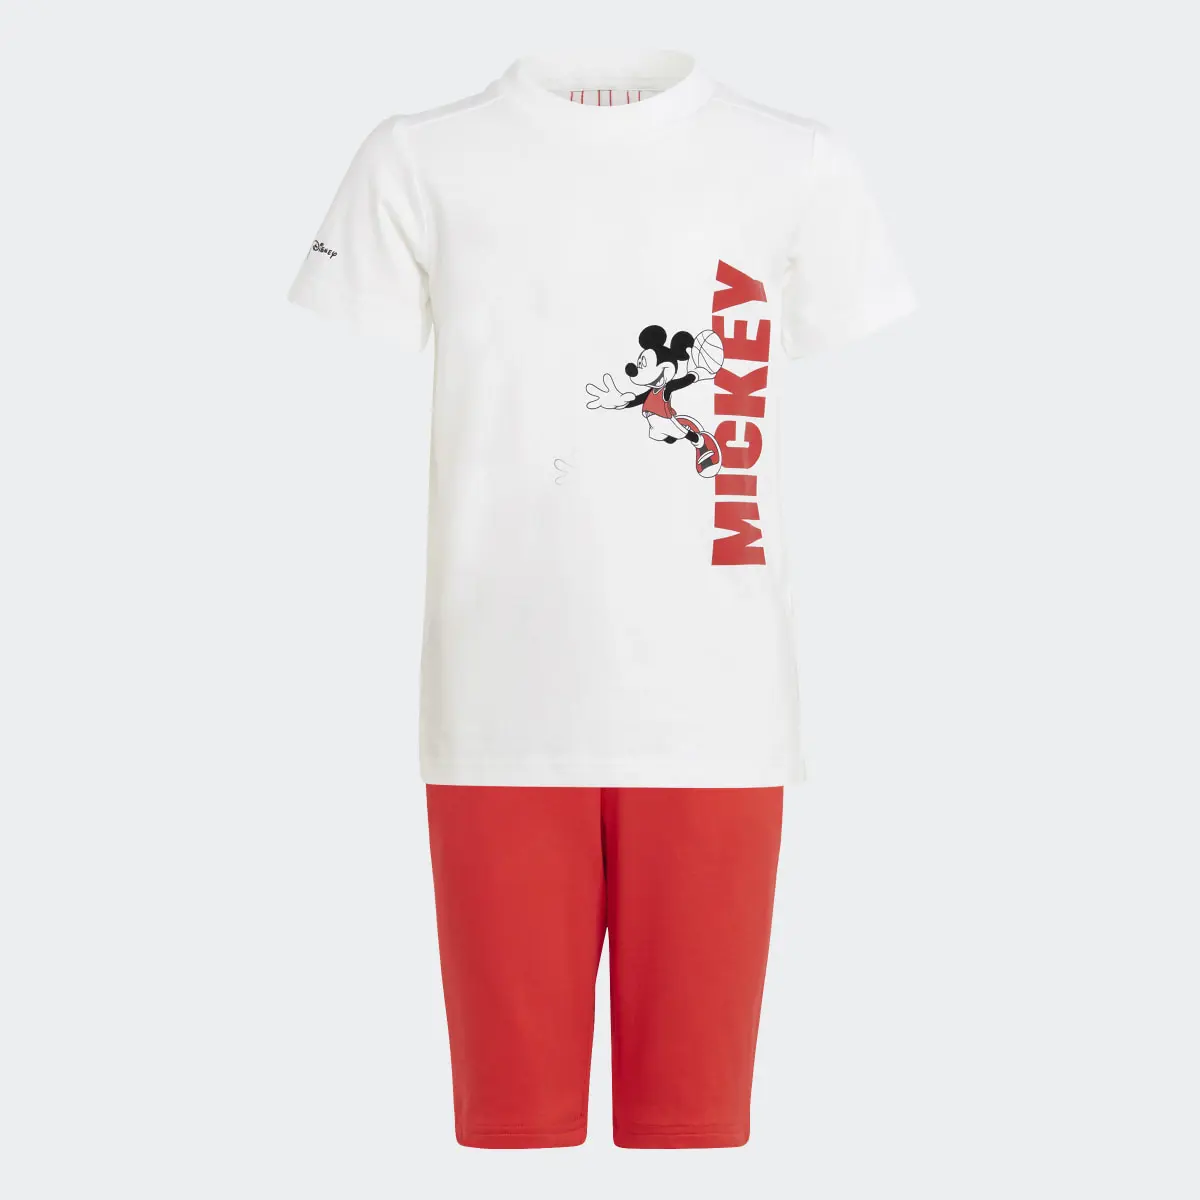 Adidas Completo Disney Mickey Mouse Summer. 1